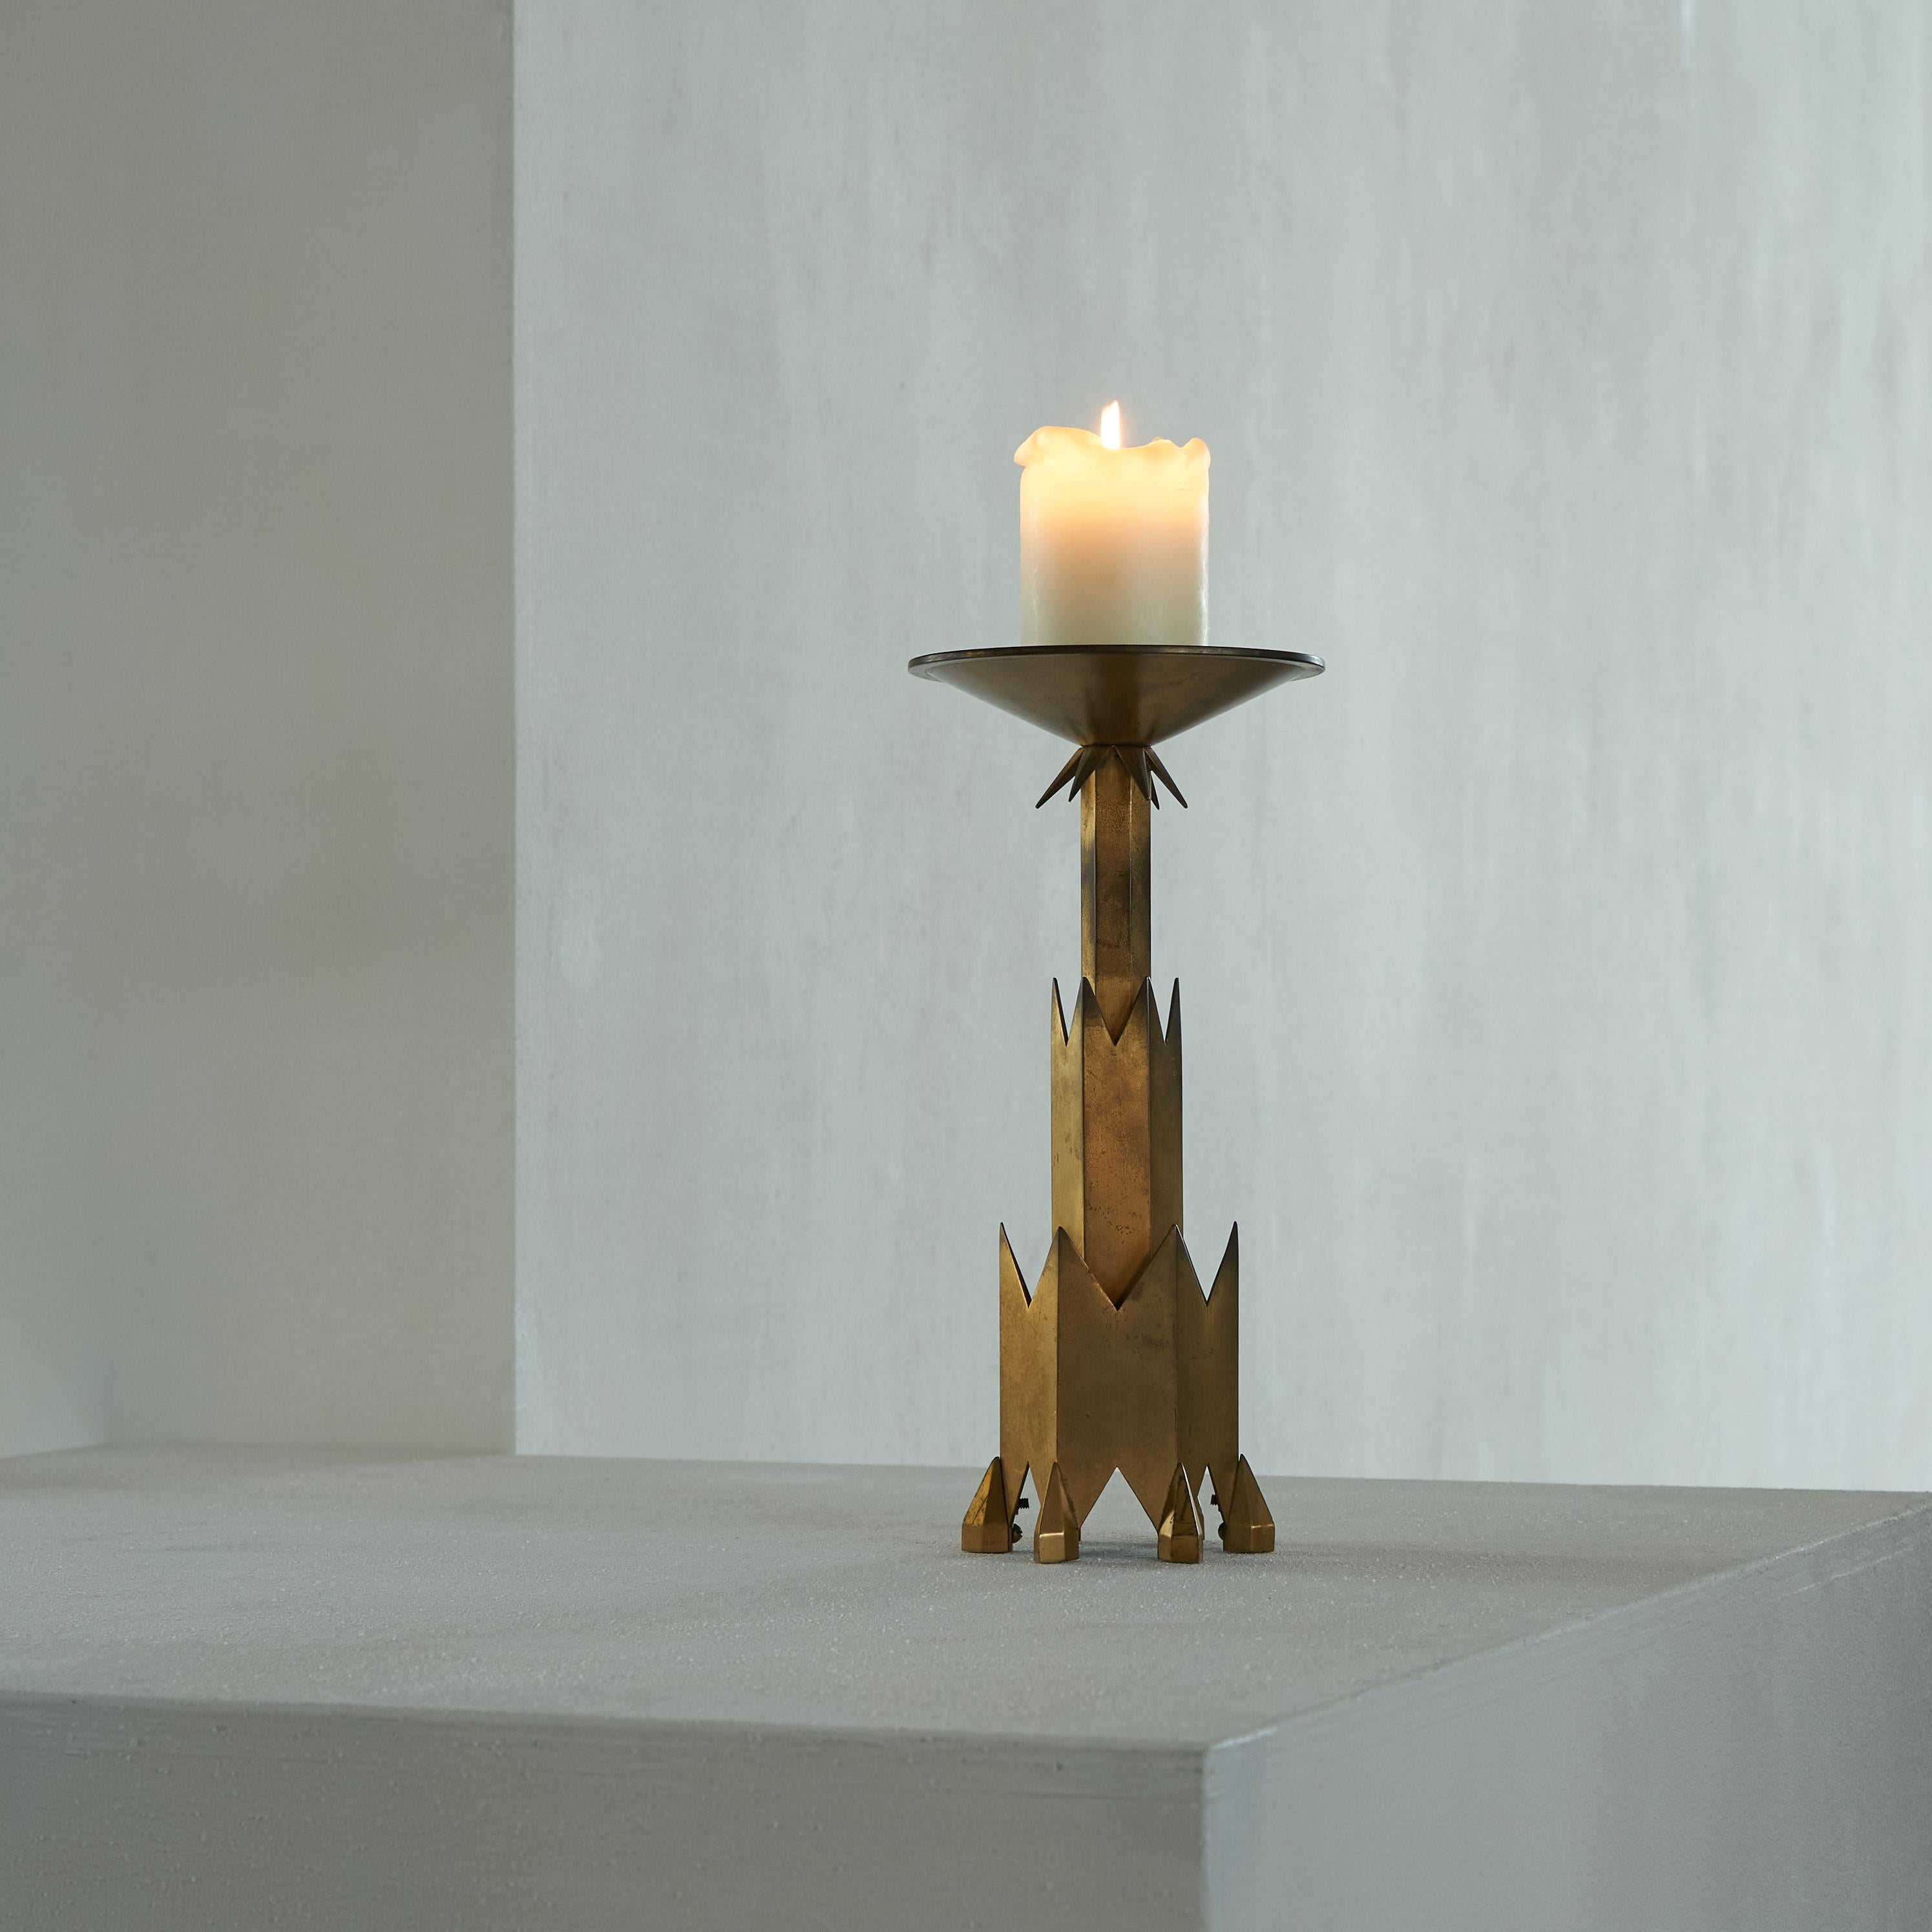 Remarkable Art Deco candle holder in patinated brass, first half of the 20th century.

A beautiful and sizeable candle holder with a remarkable Art Deco design. This candle holder is a beautiful piece of art deco design. Sharp and pointed and rich